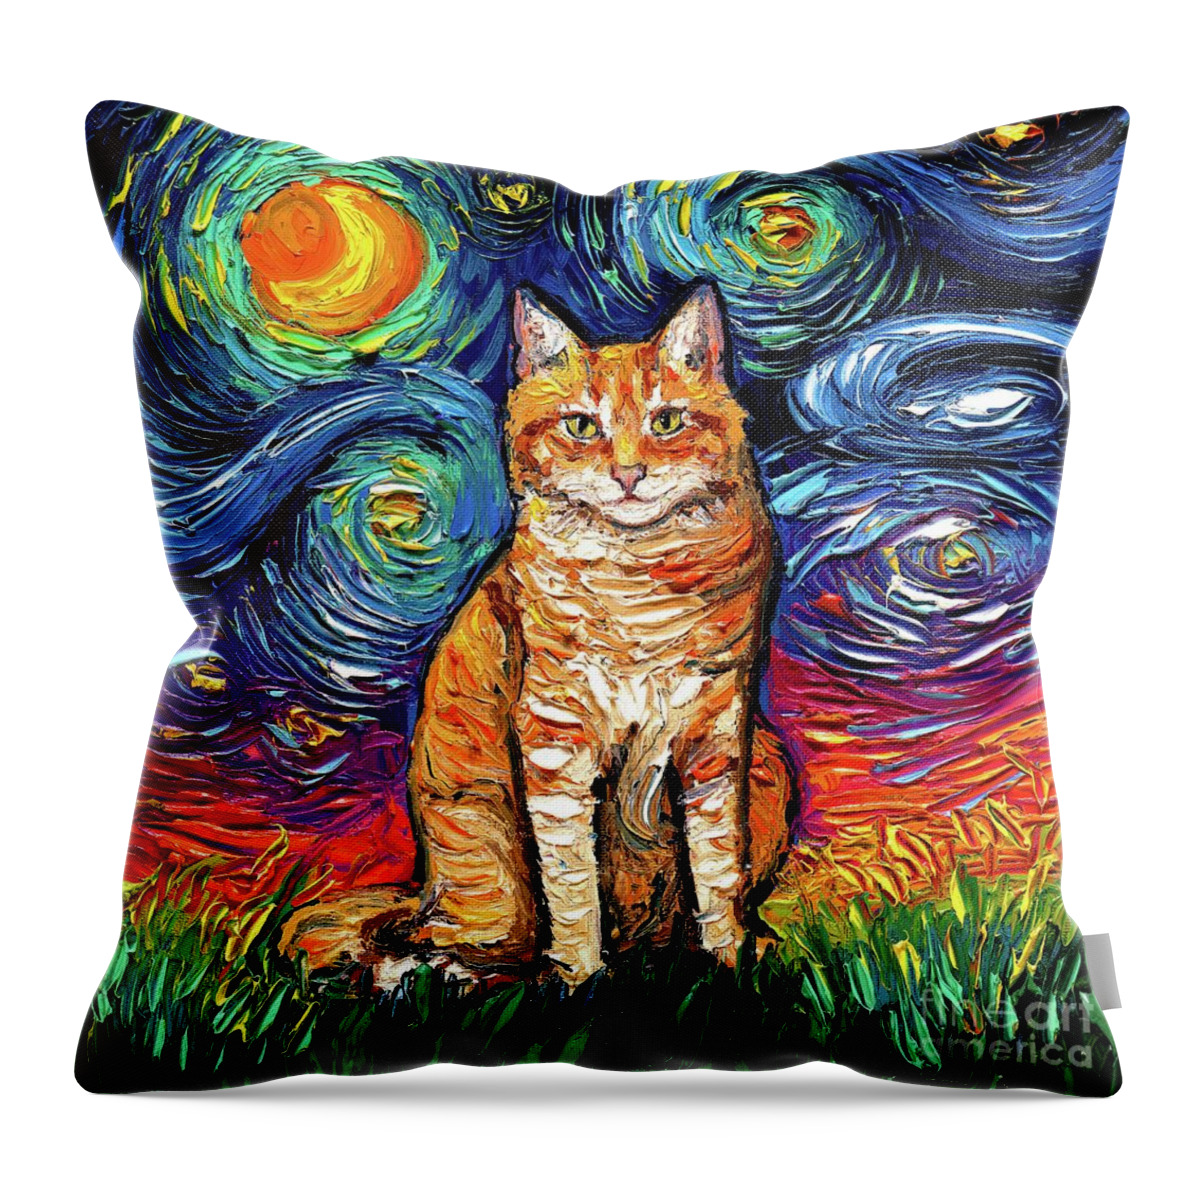 Orange Tabby Throw Pillow featuring the painting Orange Tabby Seated by Aja Trier